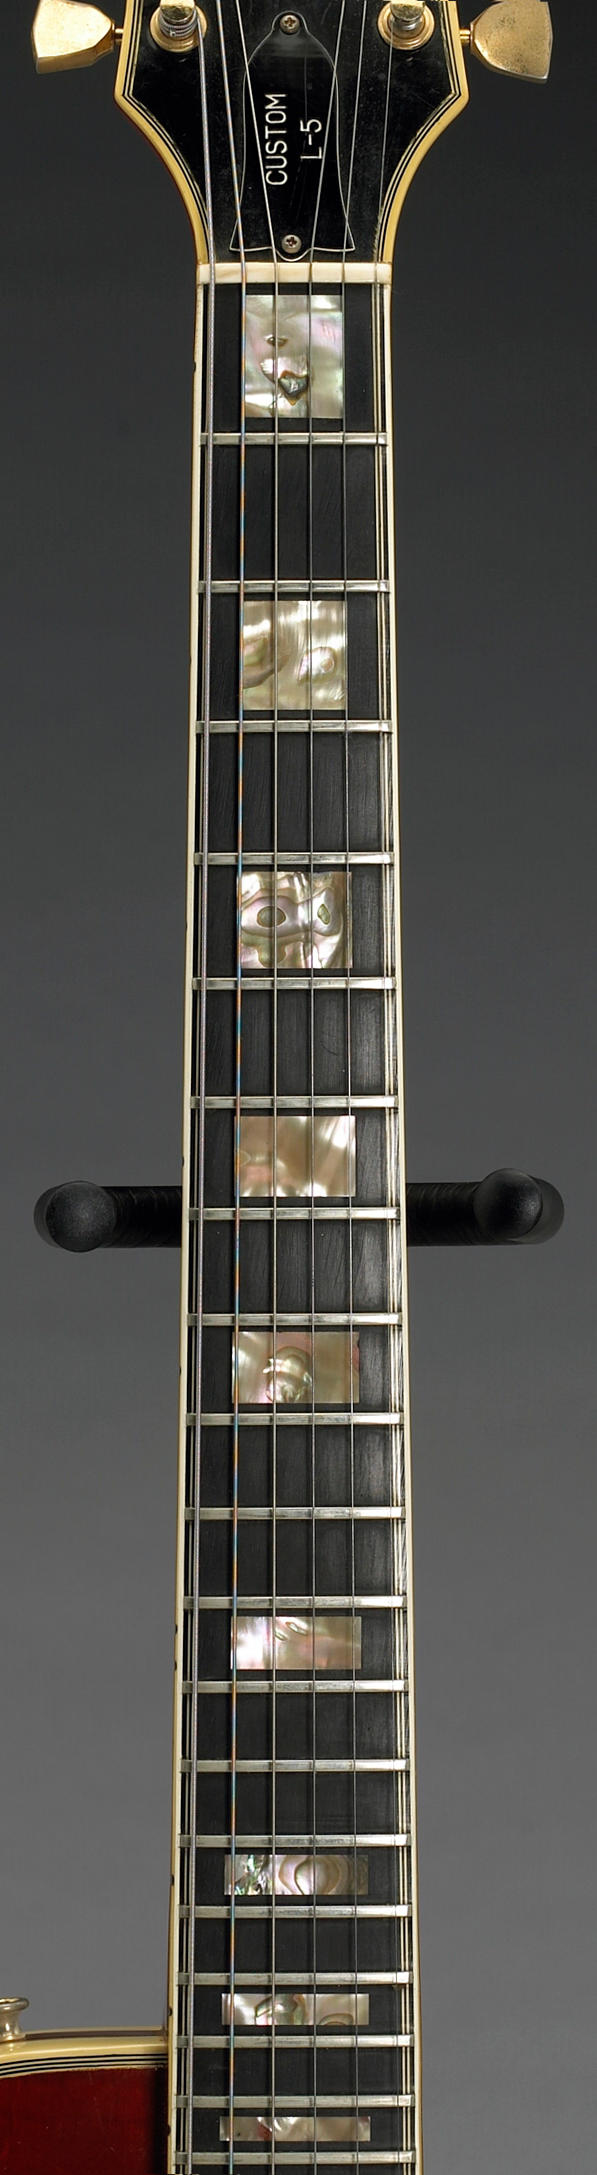 A Jerry Garcia electric guitar by Gibson, (L-5 S), circa 1974